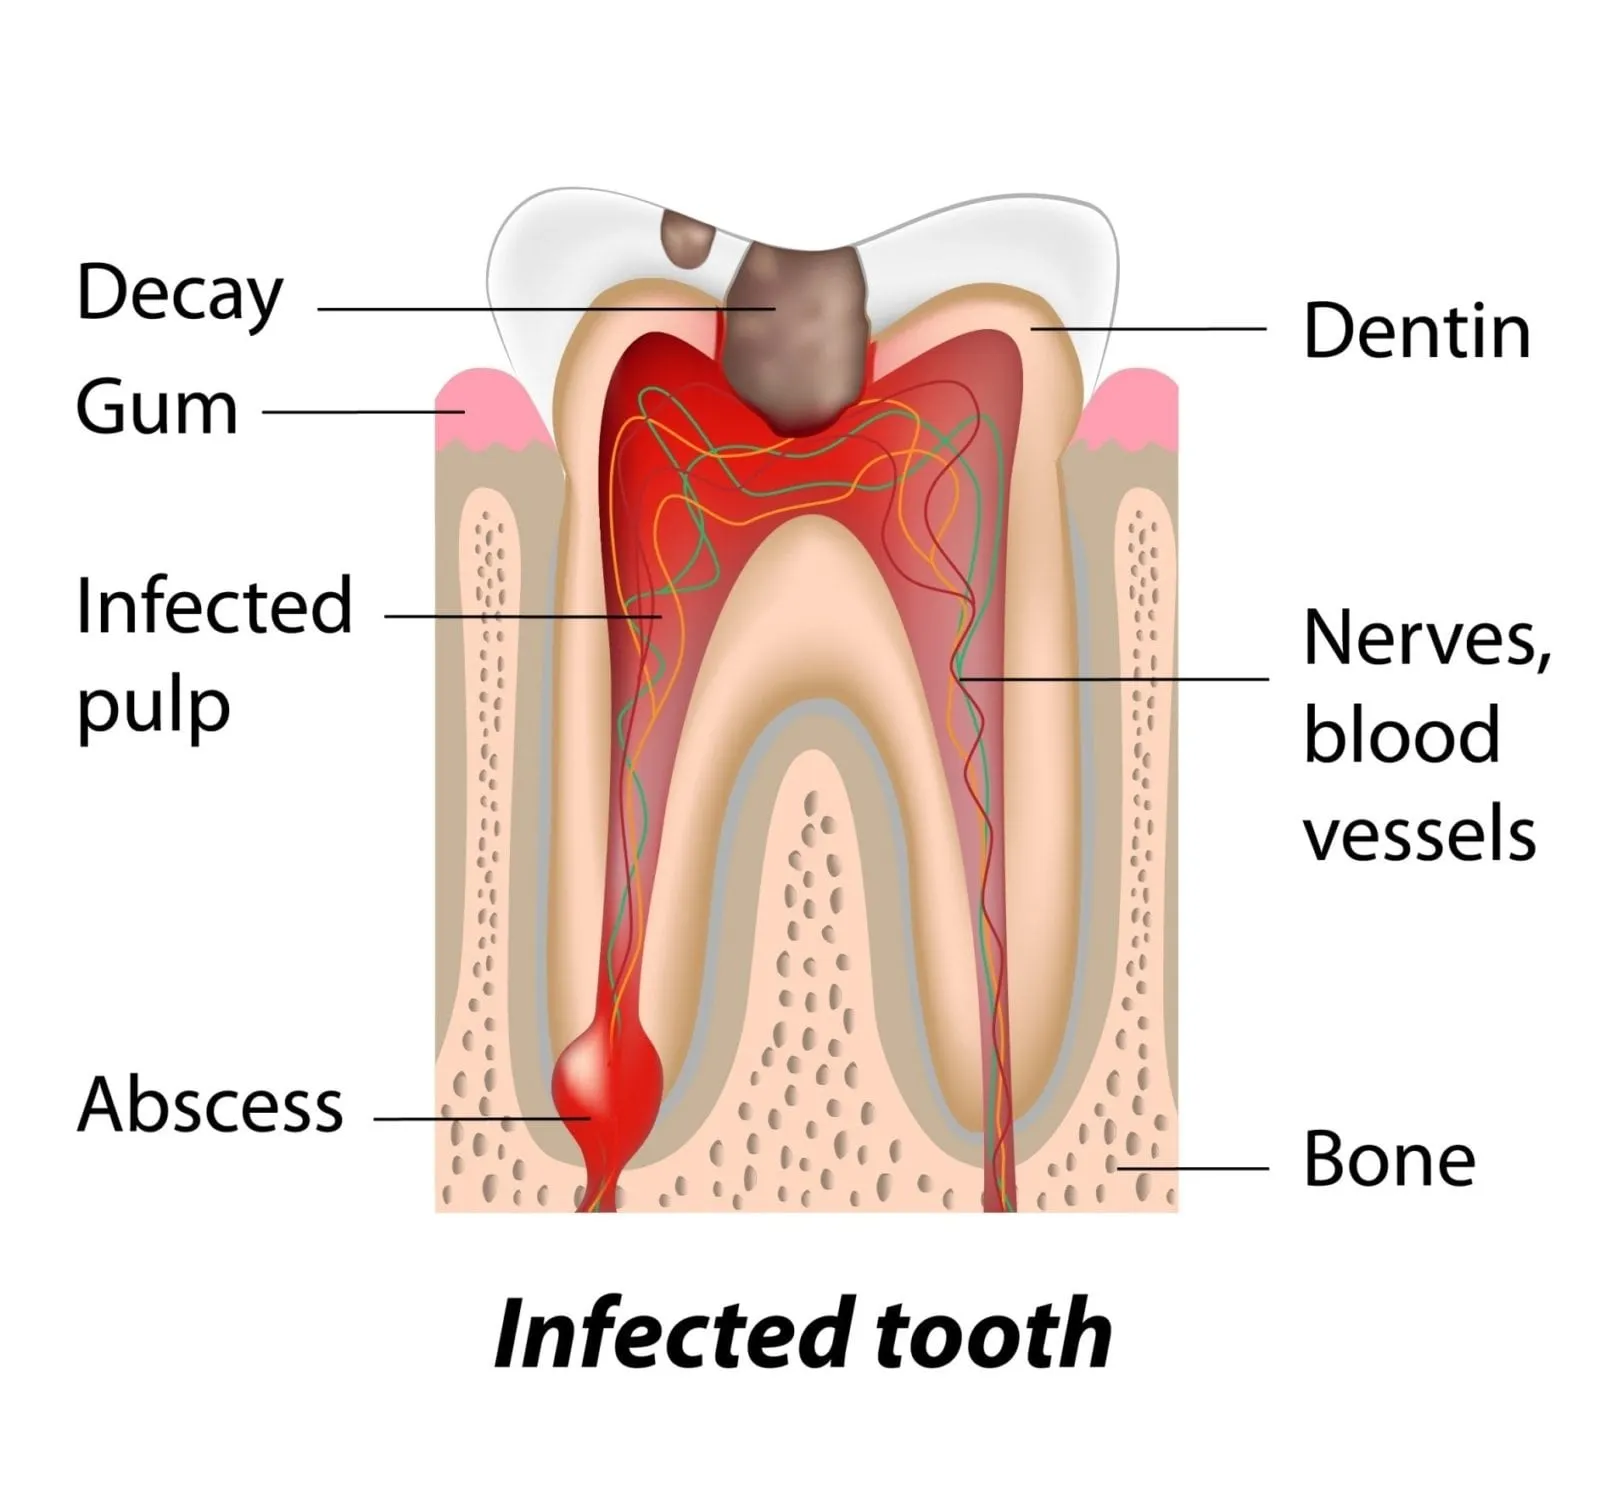 Infected tooth illustration